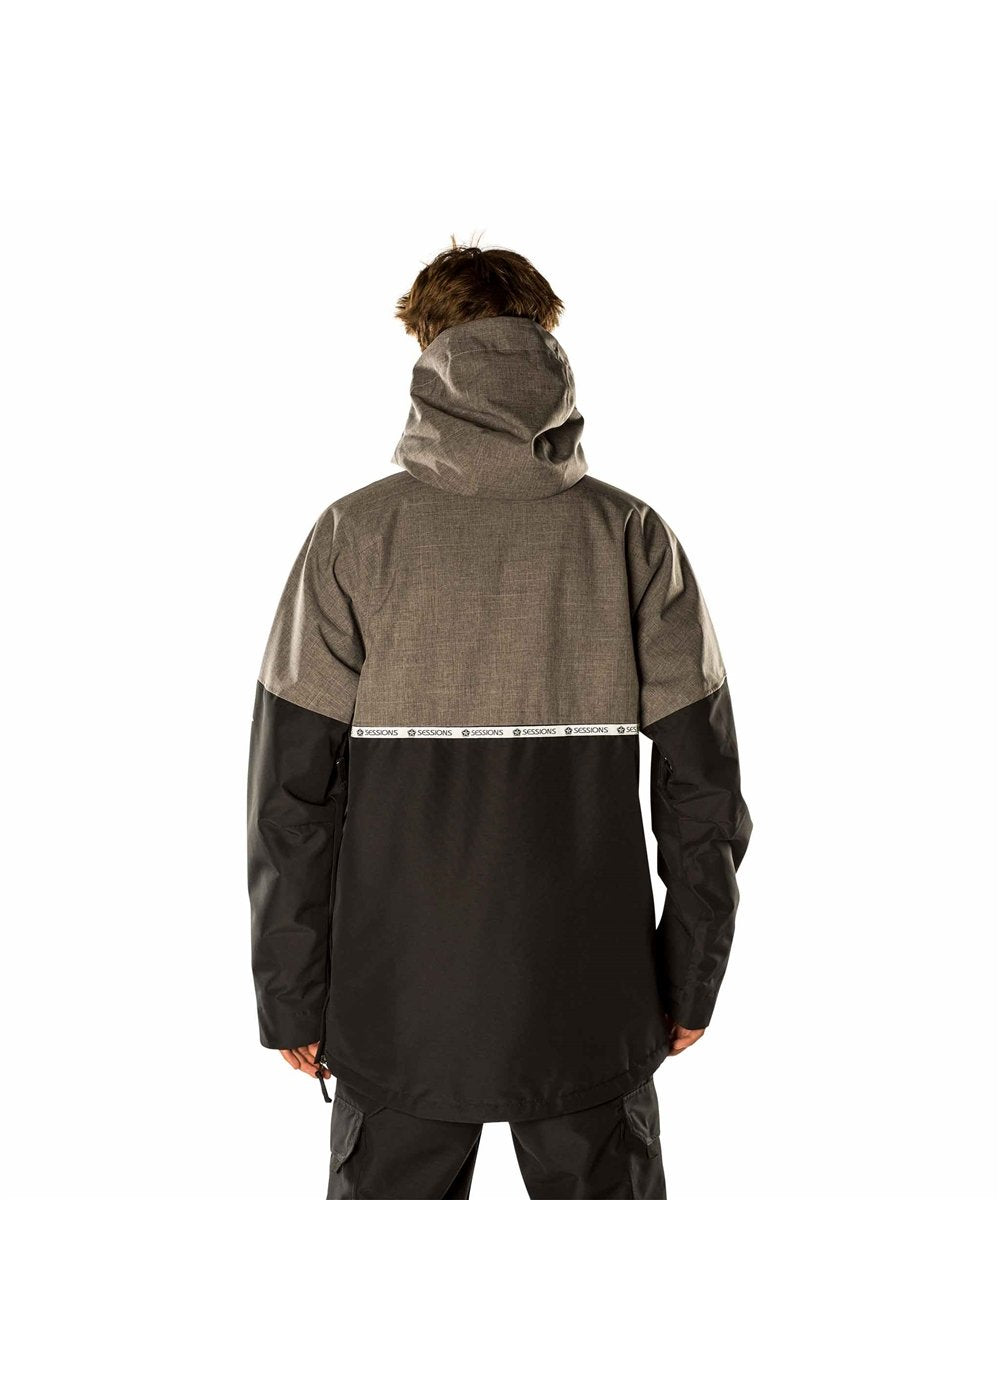 SESSIONS // ANORAK ISOLÉ HOMME CENTRAL